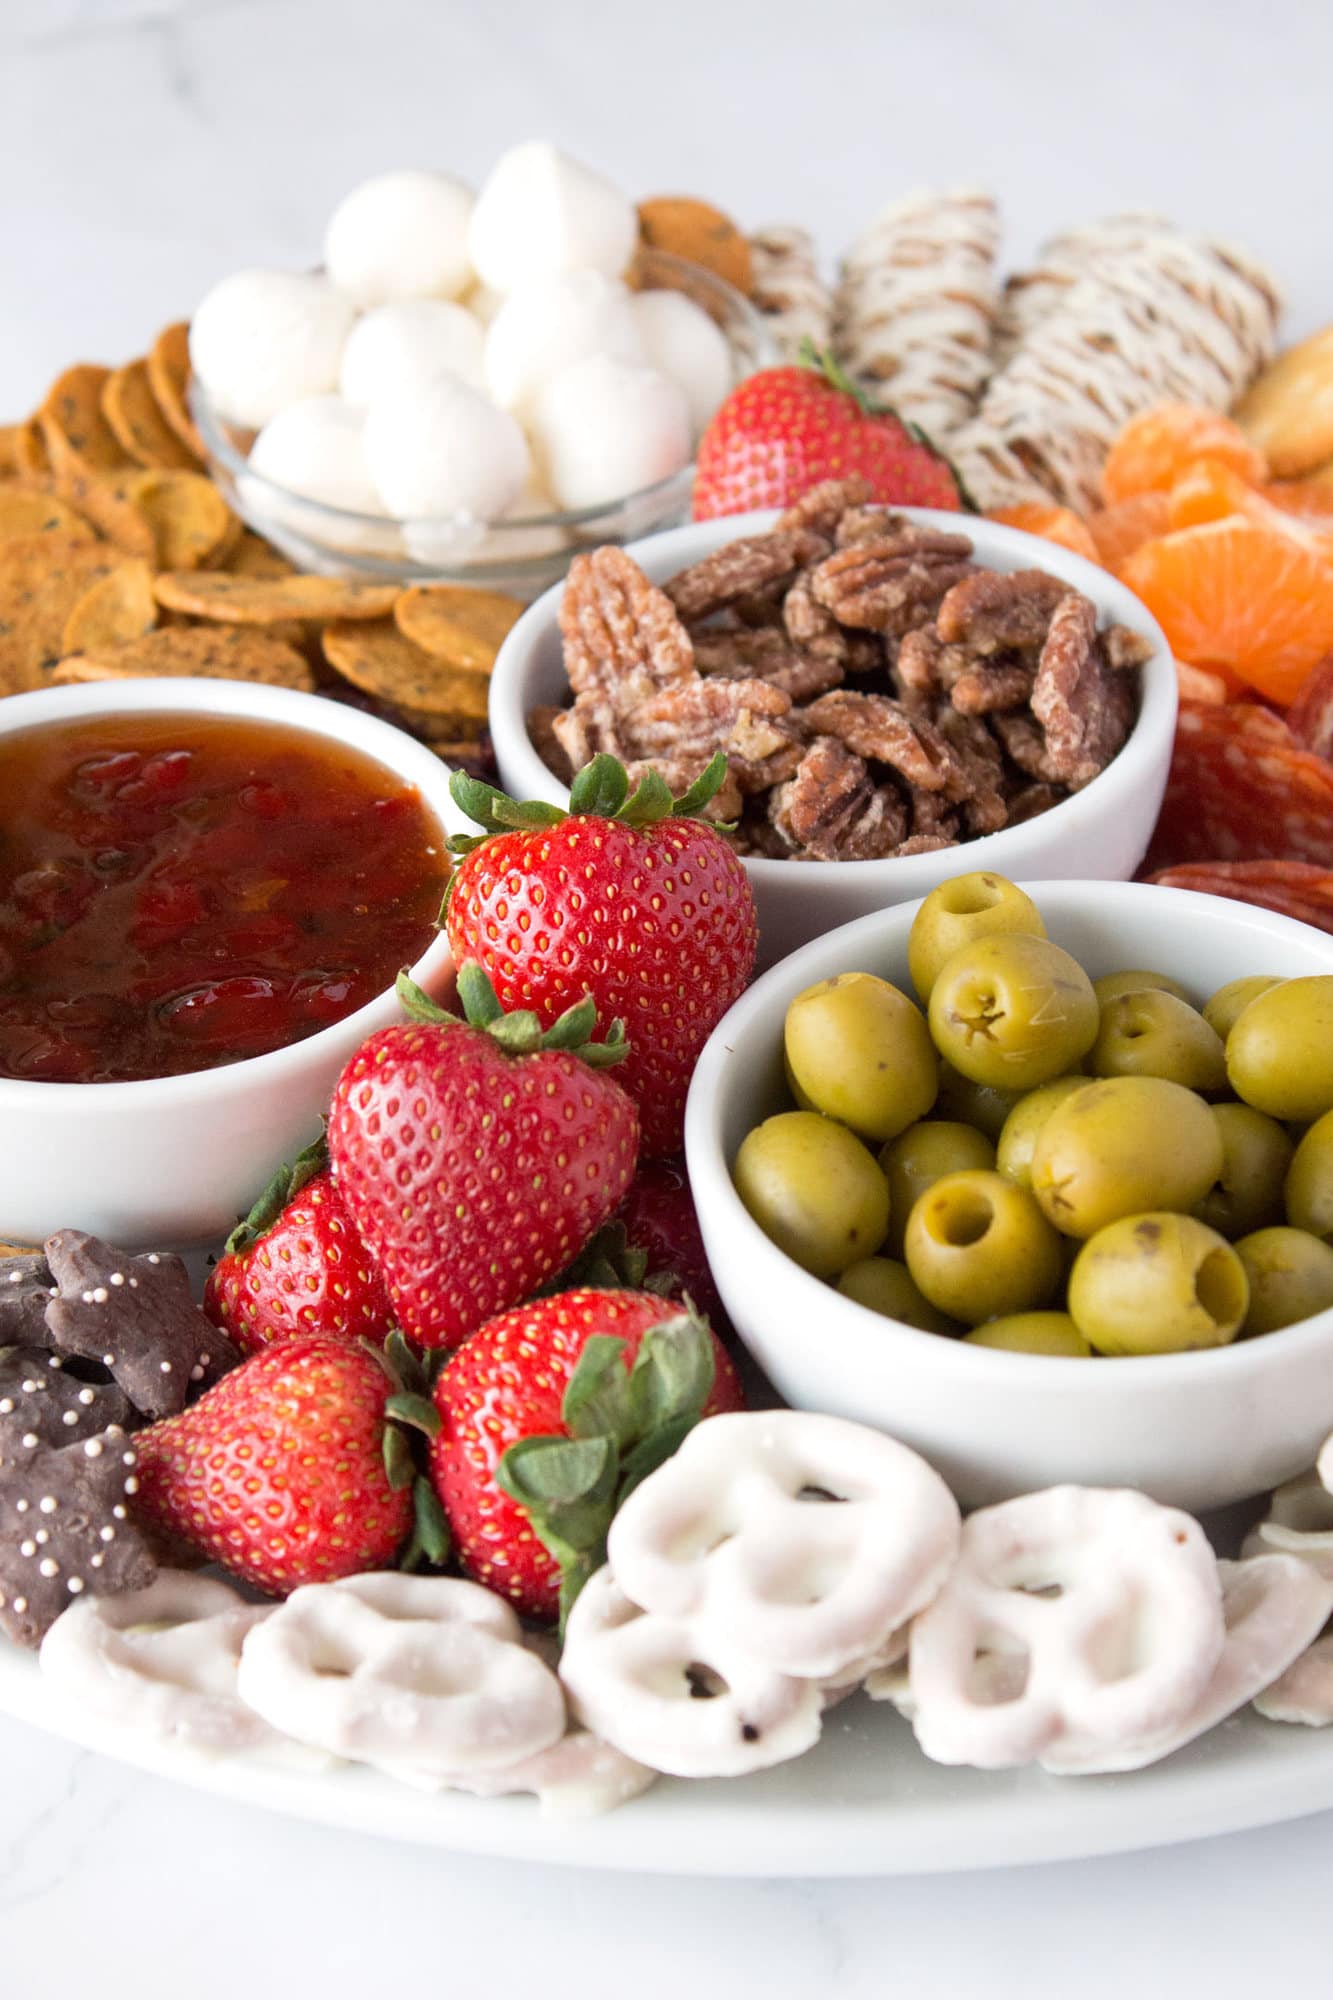 Berries, pretzels, olives, and other Christmas snacks on snack board.